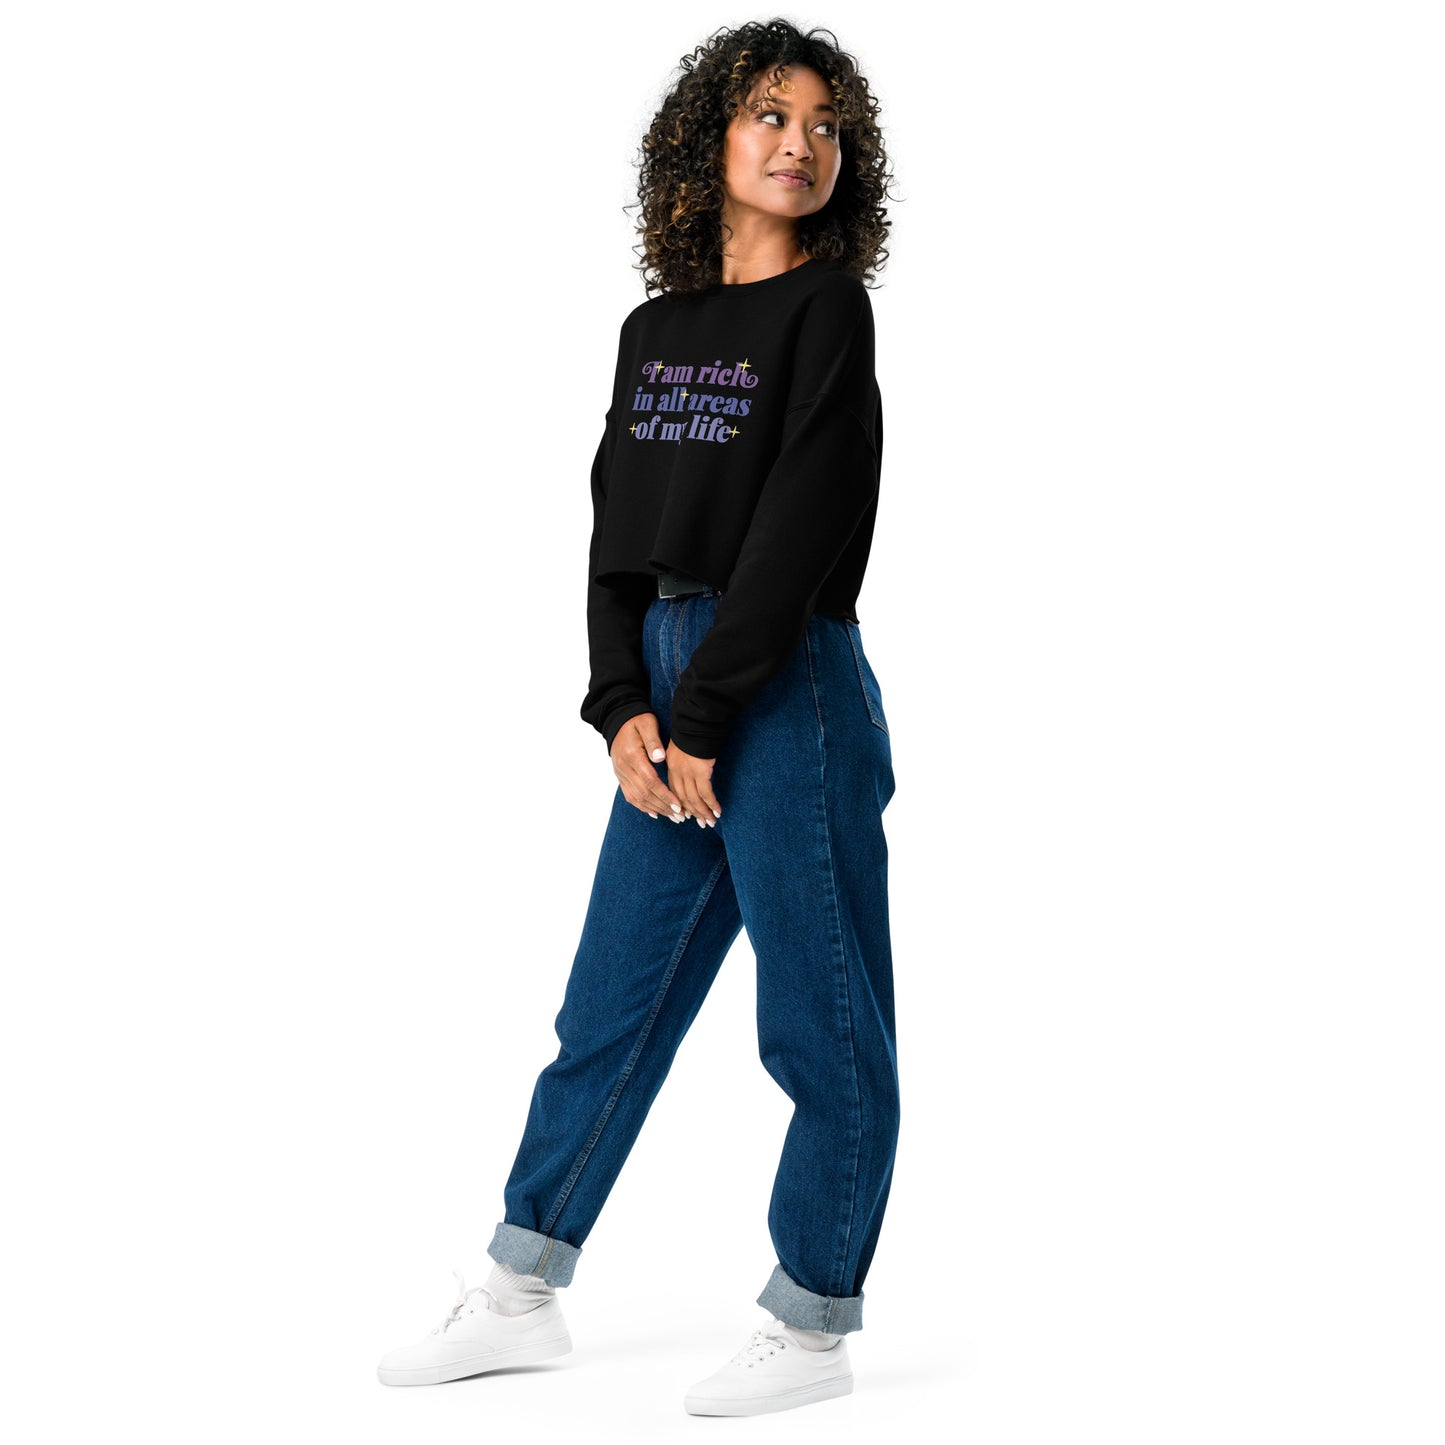 Crop Sweatshirt Womens (I'm Rich In All Areas Of My Life - Inspiration 0017)